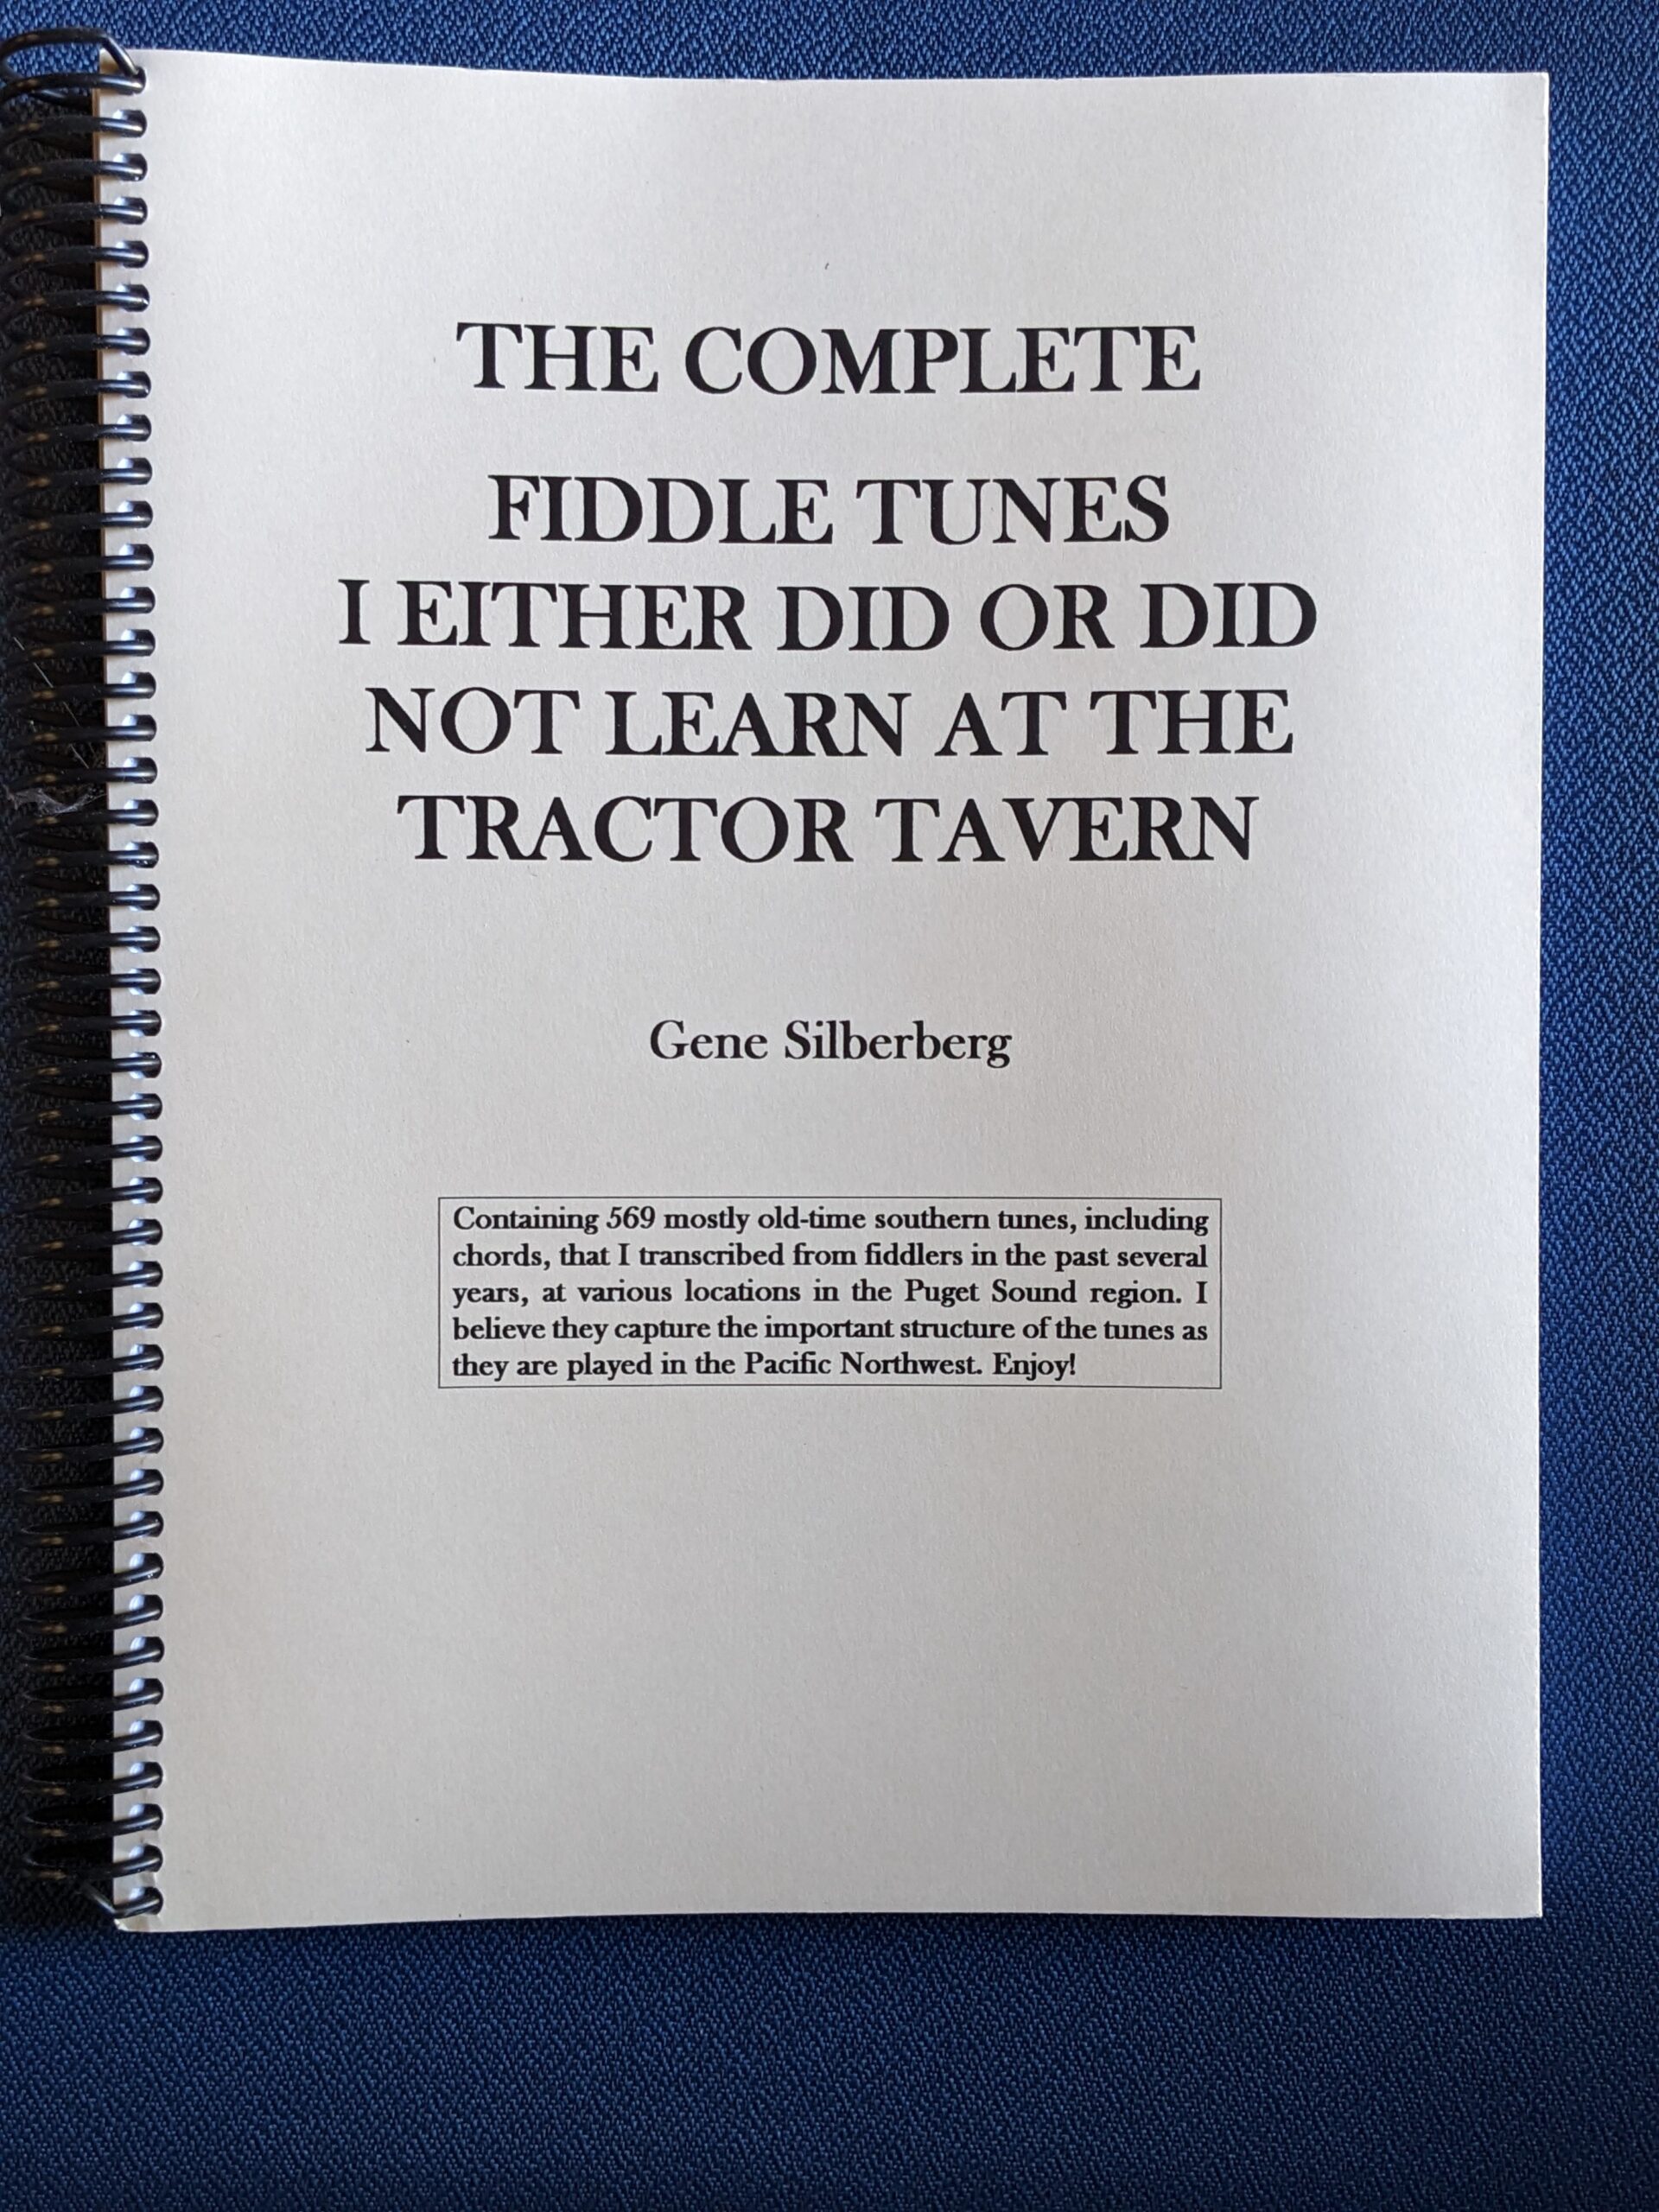 Fiddle Tunes “I Either Did or Did Not Learn at the Tractor Tavern” Product